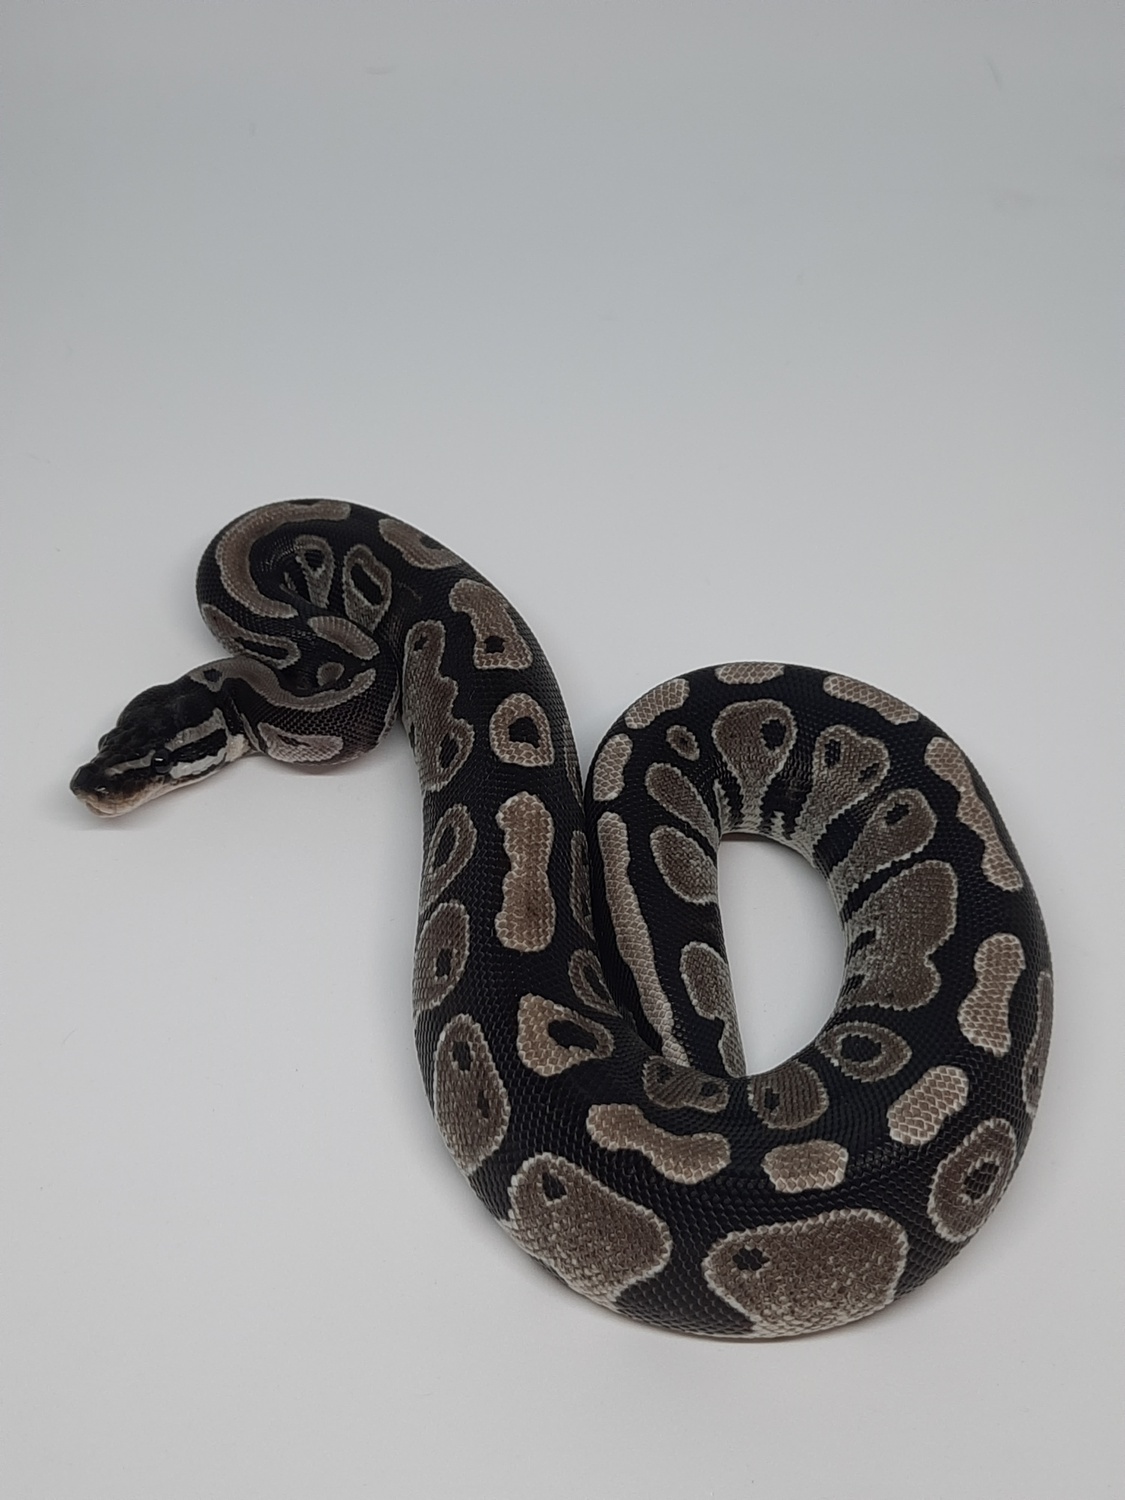 M J Axanthic 100% Pied Ball Python by Marty